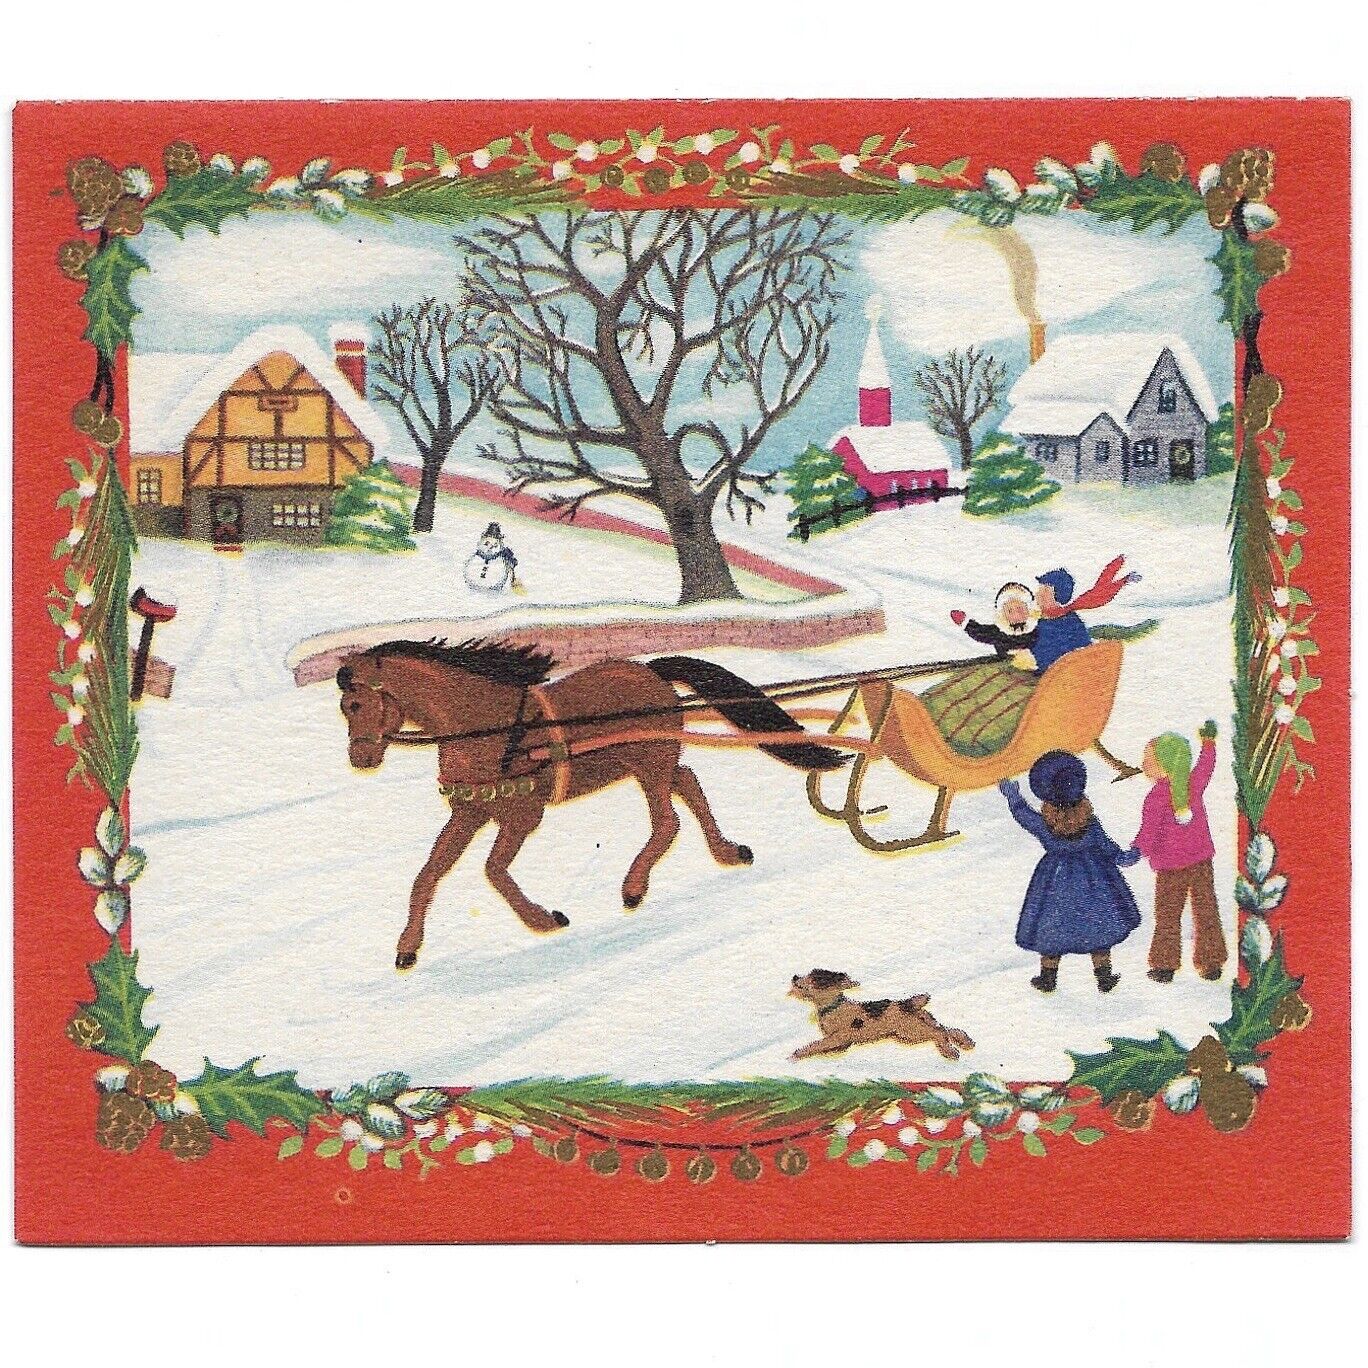 Vintage Christmas Greeting Card Couple On Horse Carriage Winter Snow Scene 1940s